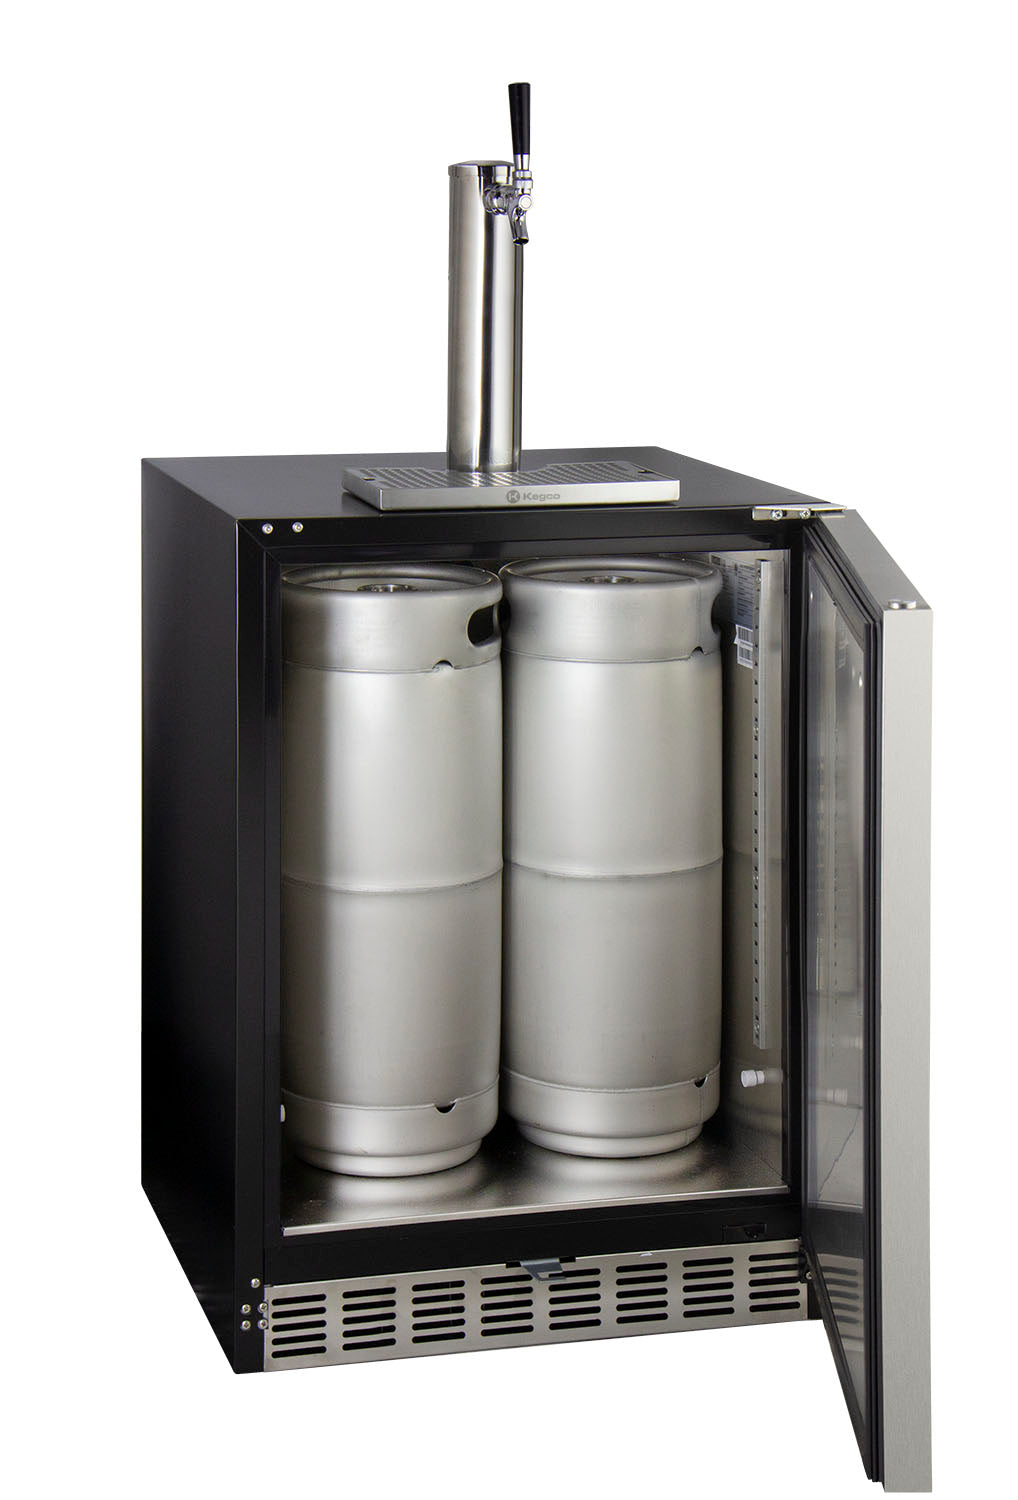 Kegco 24" Wide Single Tap Stainless Steel Built-In Right Hinge ADA Kegerator with Kit